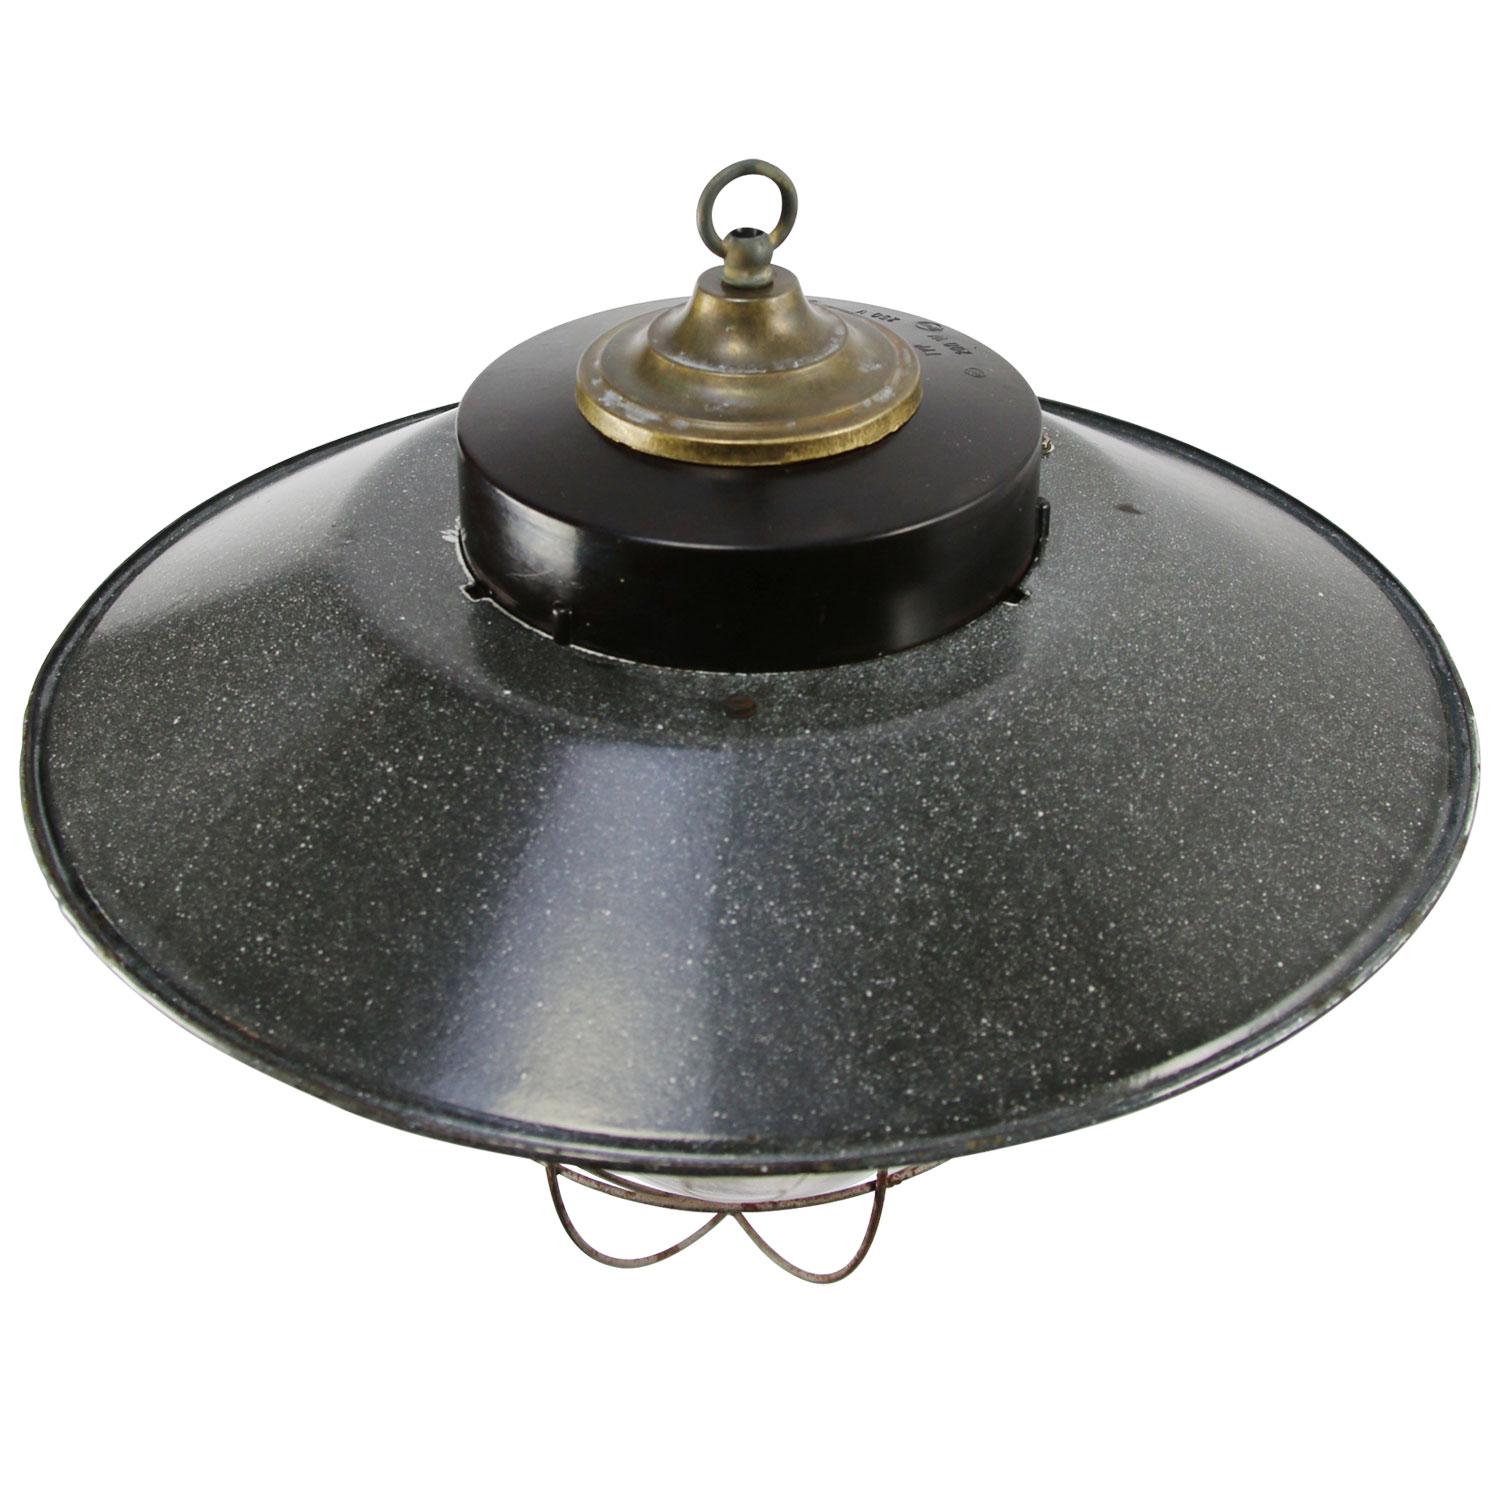 Industrial pendant light. Grey enamel white interior. Bakelite with brass top. Clear glass and cage.

Weight: 3.20 kg / 7.1 lb

Priced per individual item. All lamps have been made suitable by international standards for incandescent light